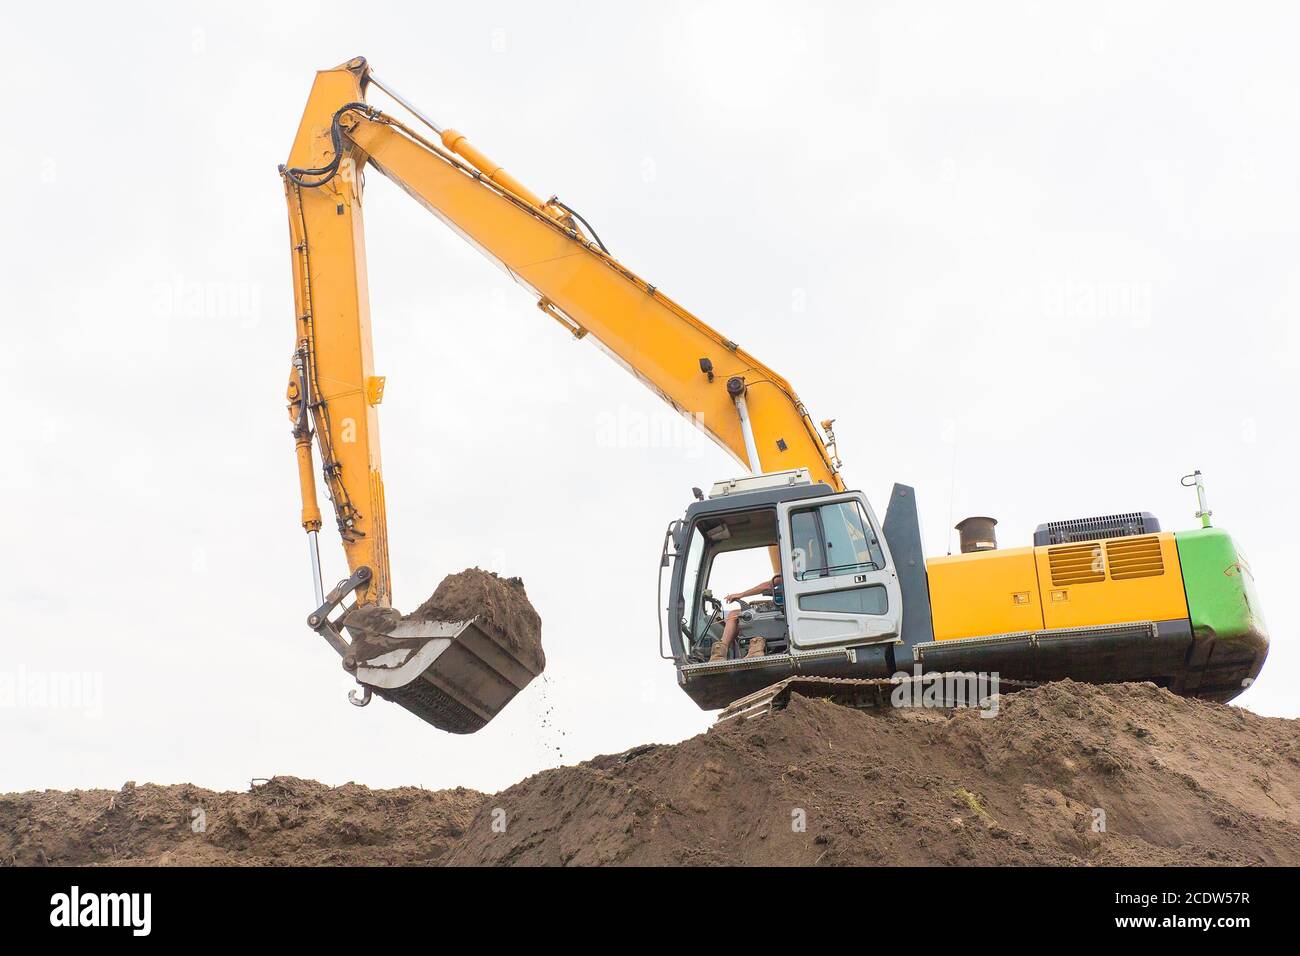 Excavator makes noise barrier with sandy soil Stock Photo